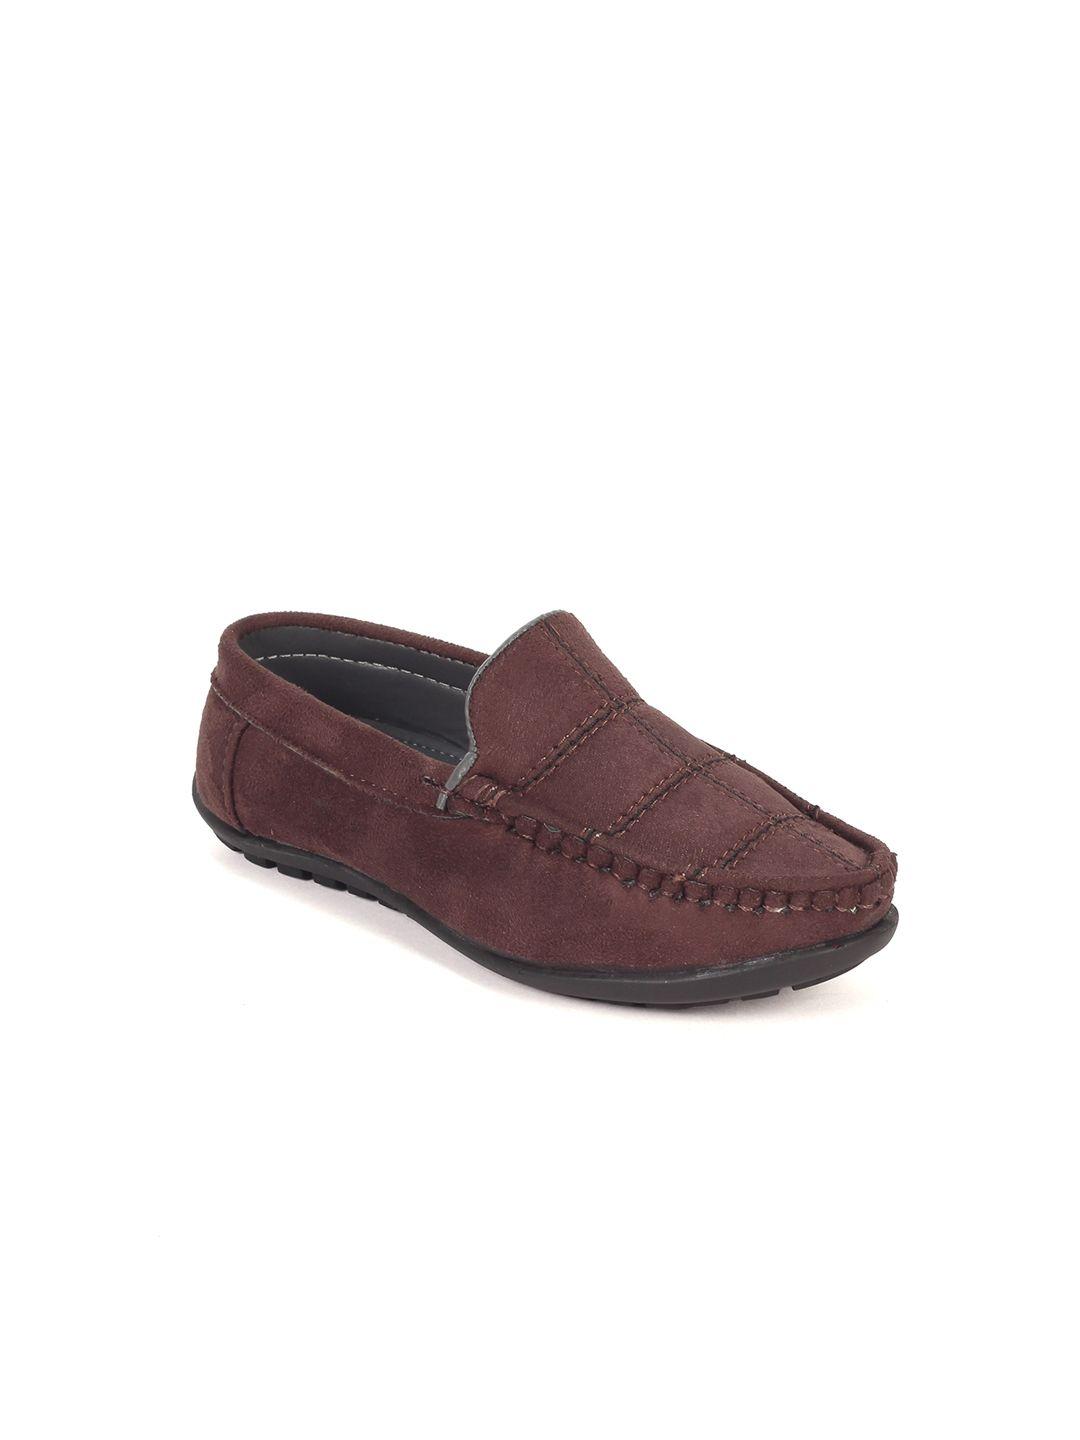 lil-lollipop-boys-brown-textured-loafers